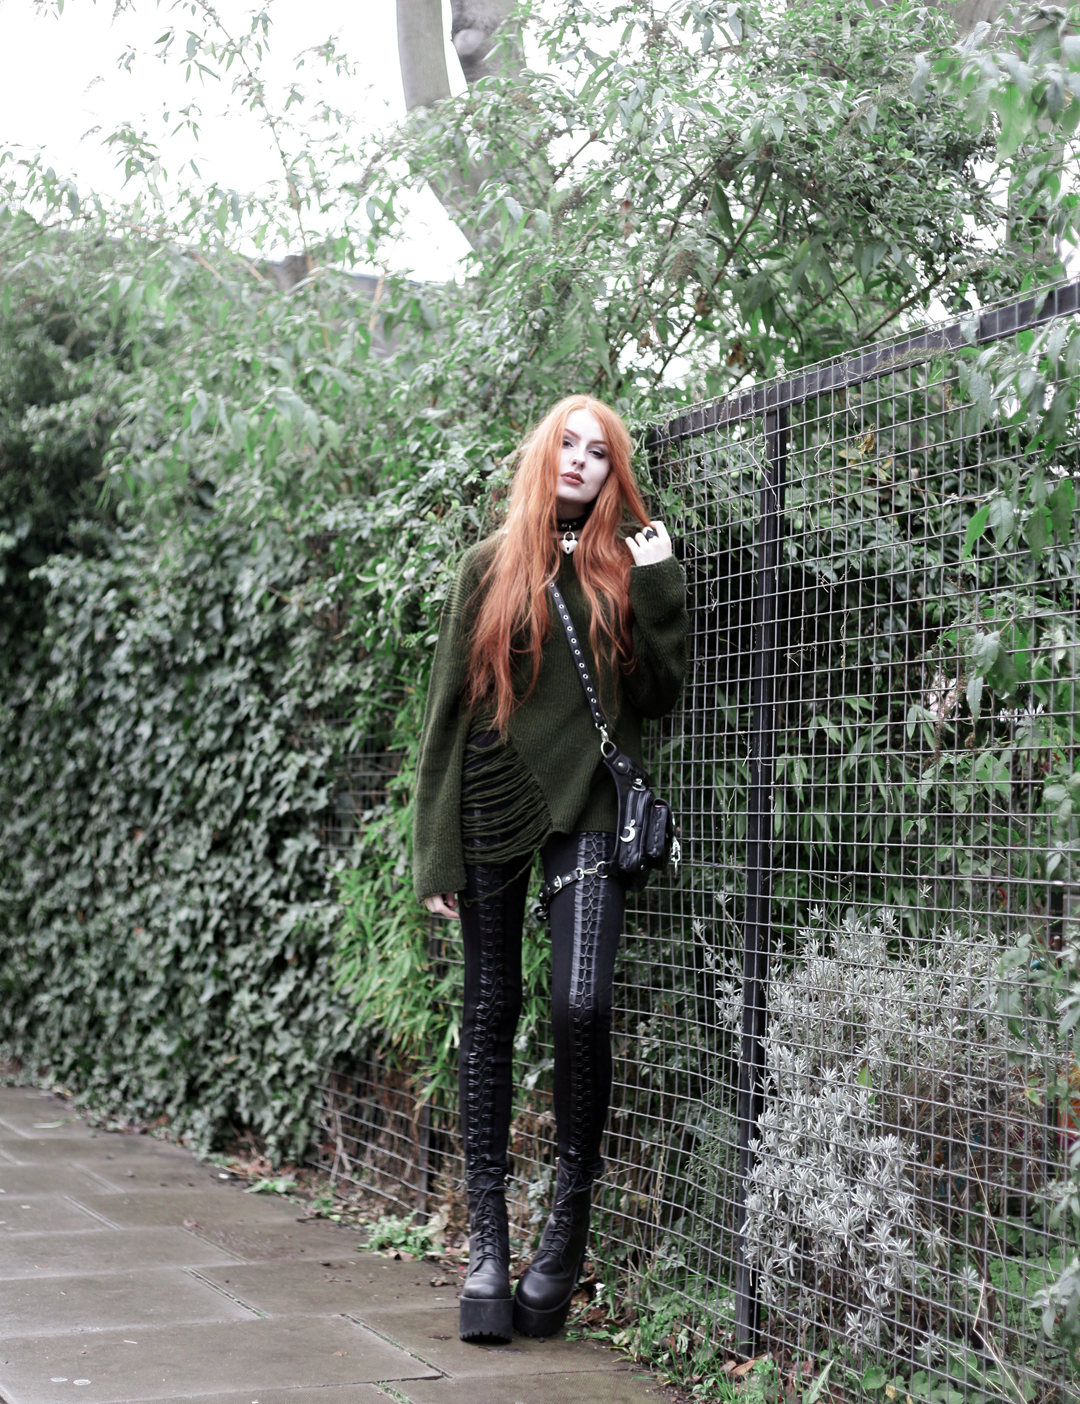 Olivia Emily wears Asos Bones Oversized jumper, Restyle pl harness bag, Stylestalker lace up leggings trousers, and Unif scosche boots